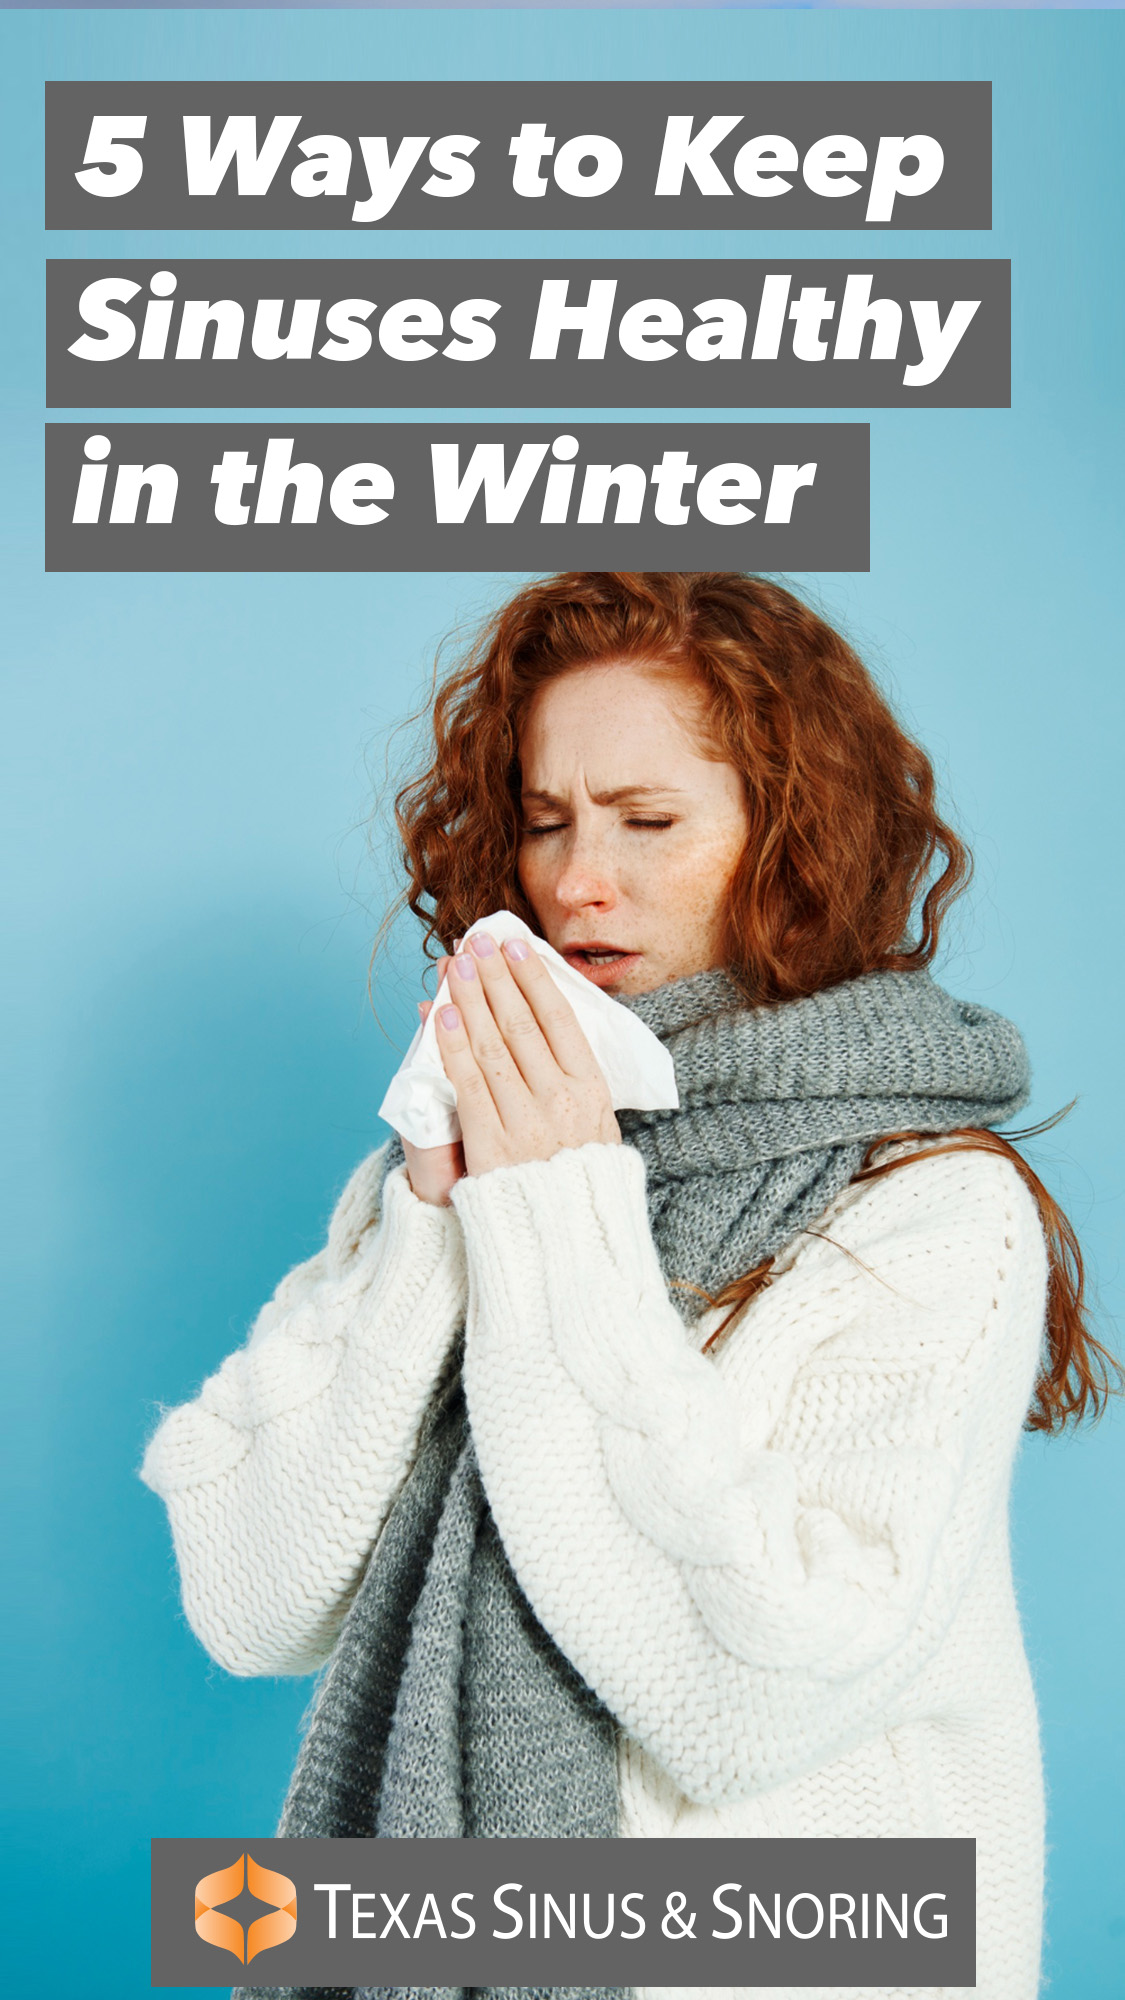 5 Ways to Keep Sinuses Health in the Winter - From Texas Sinus and Snoring - Woman blows nose while wearing scarf and sweater